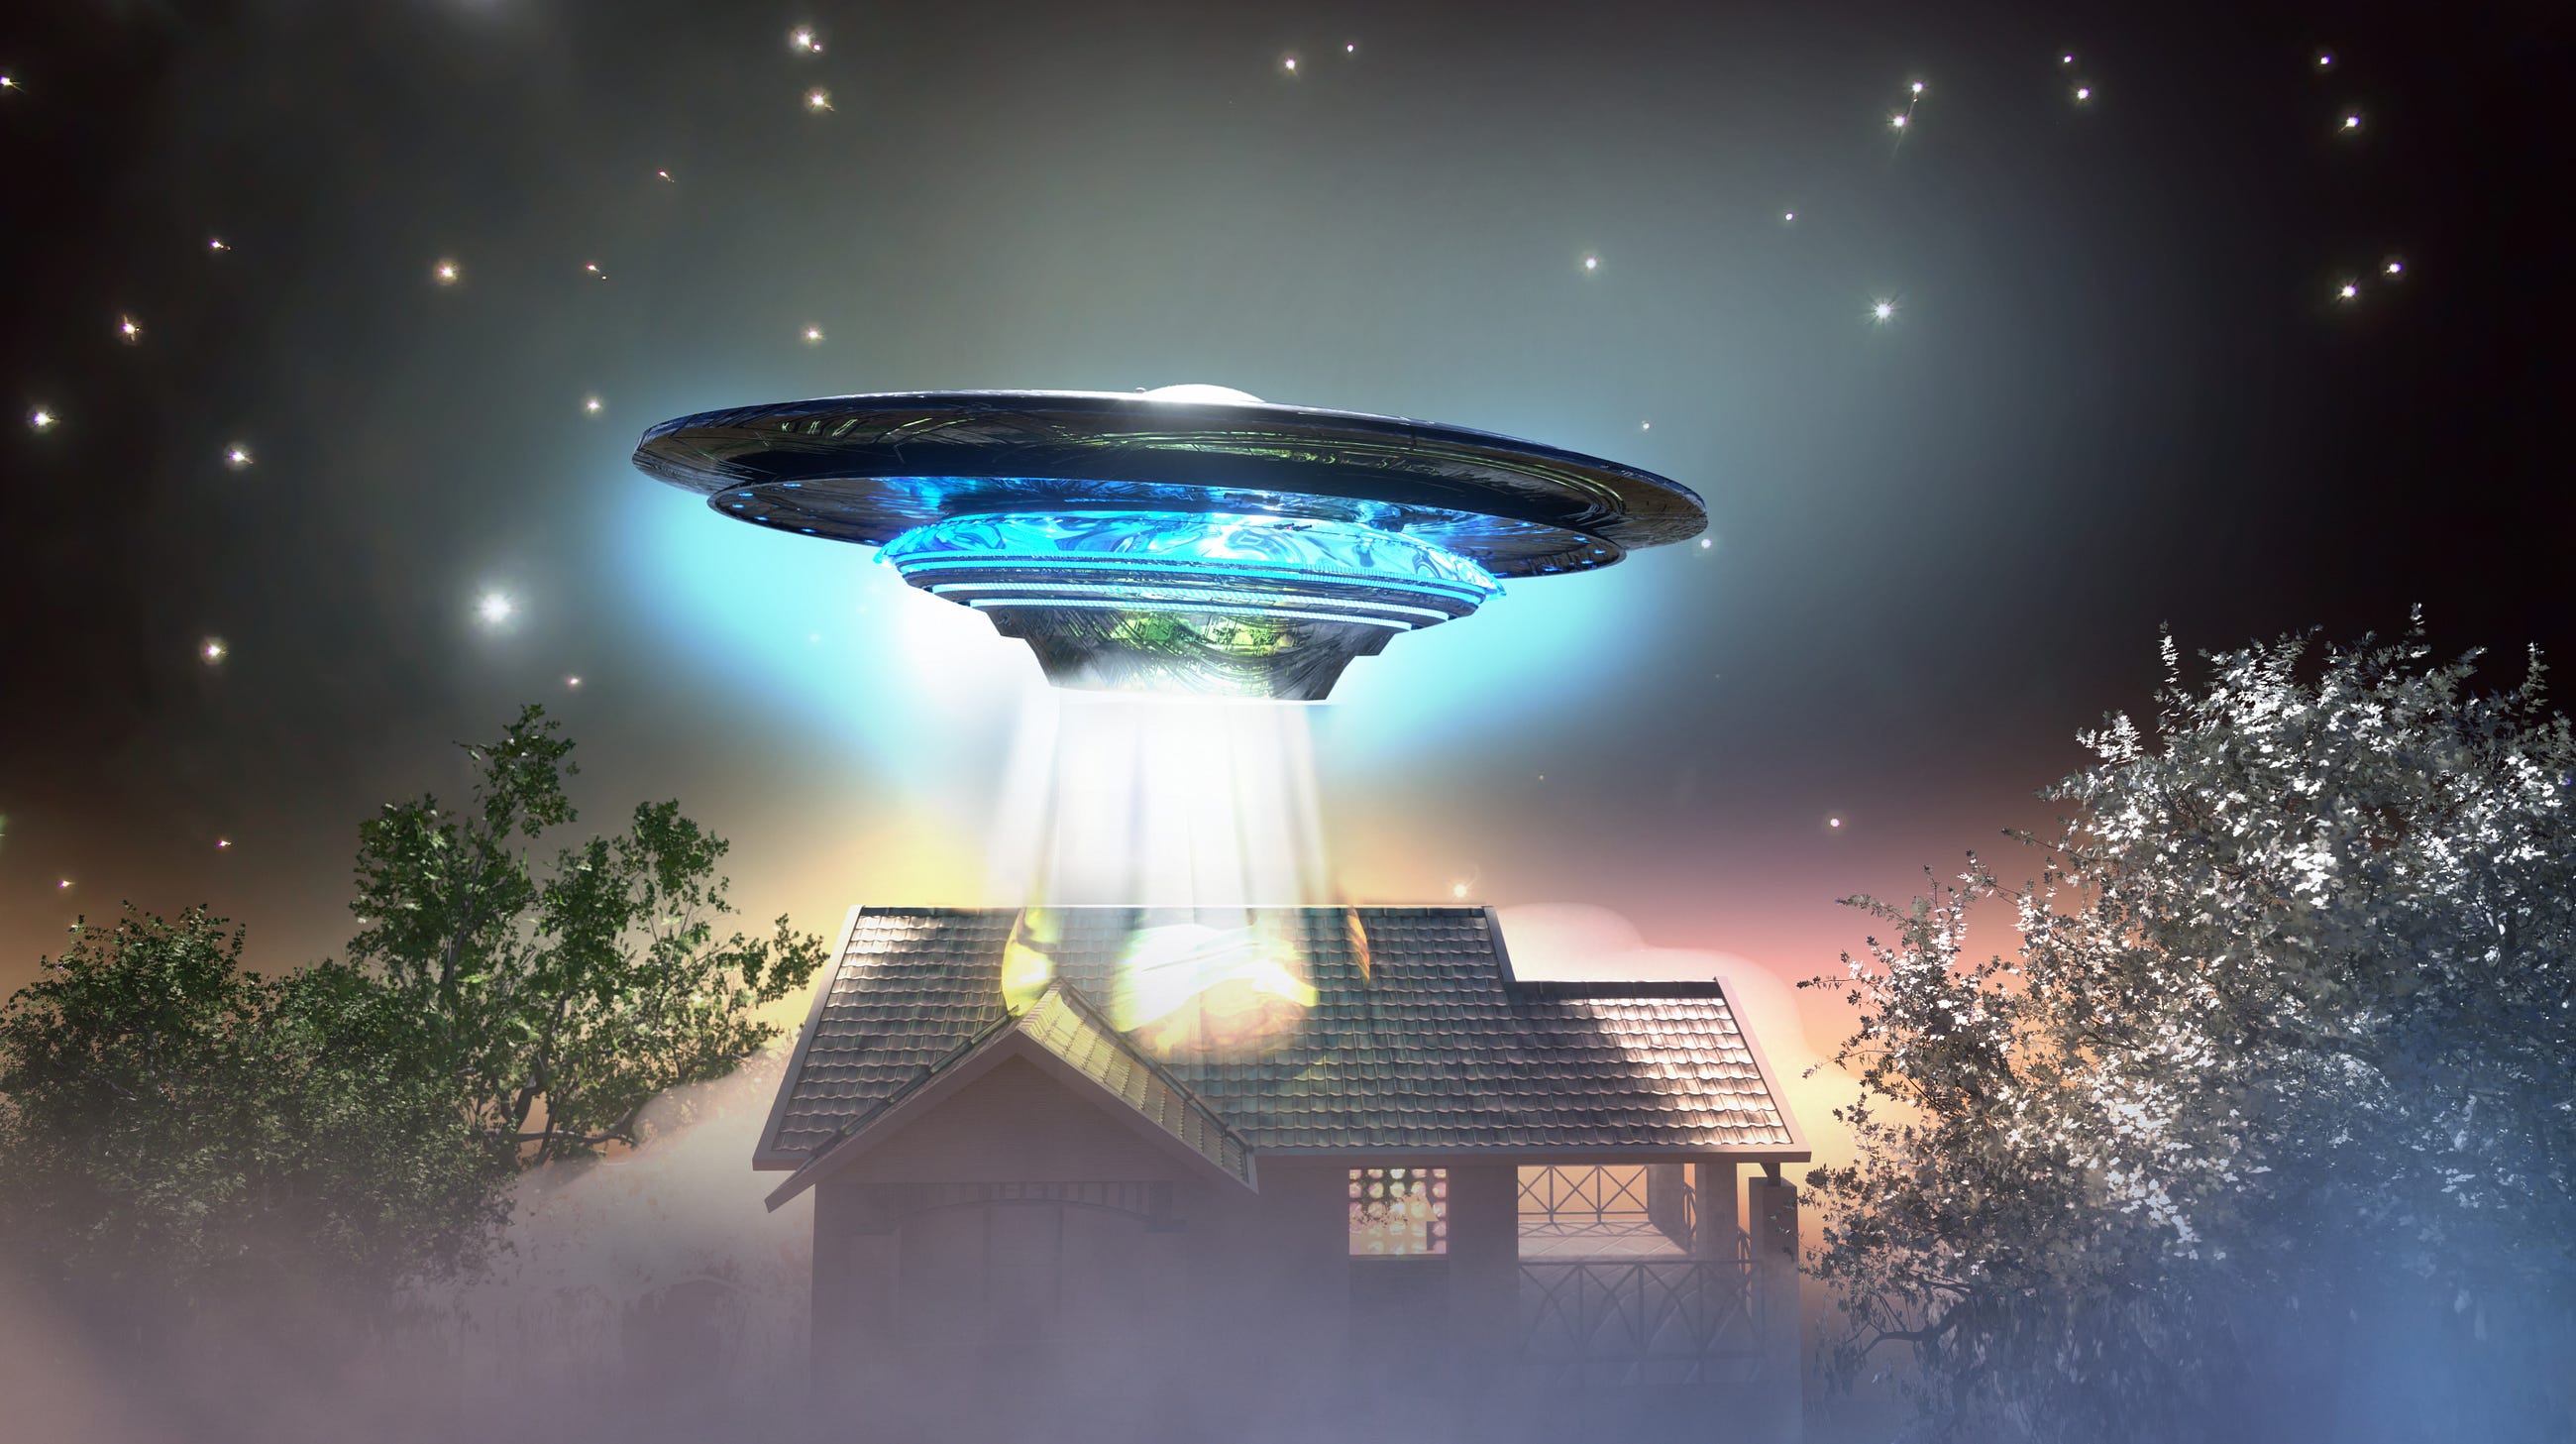 100000s of Alien Abductions and Consciousness Captures a Year